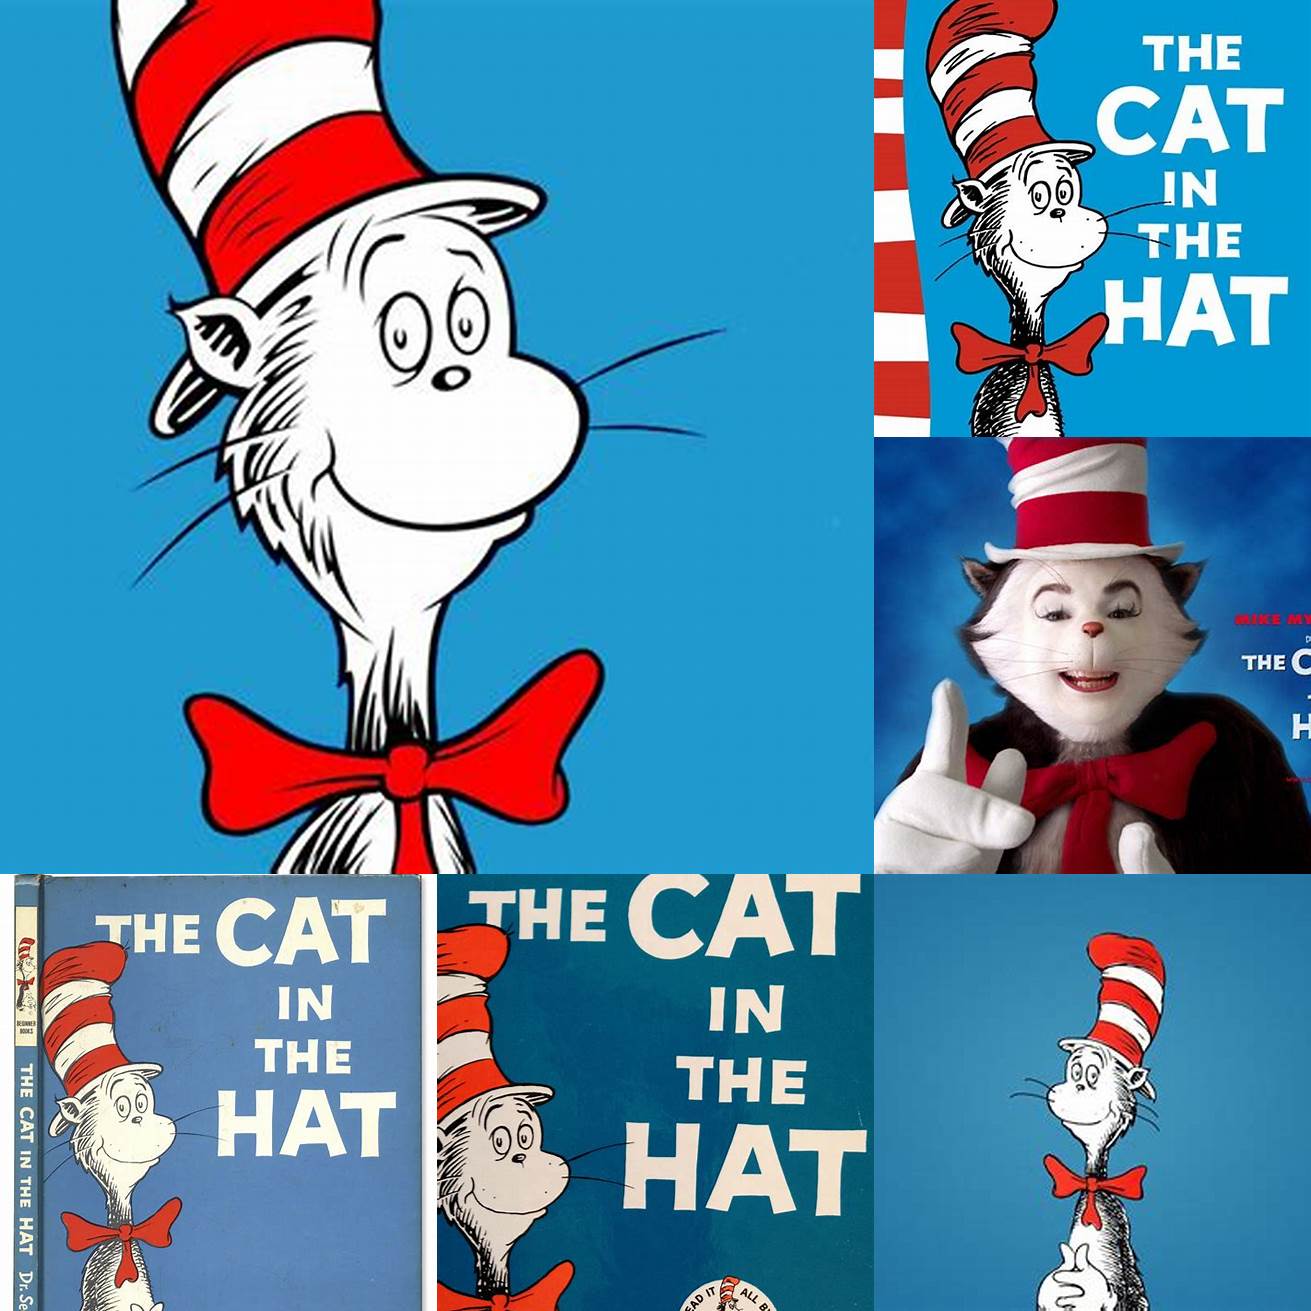 The Impact of The Cat in the Hat